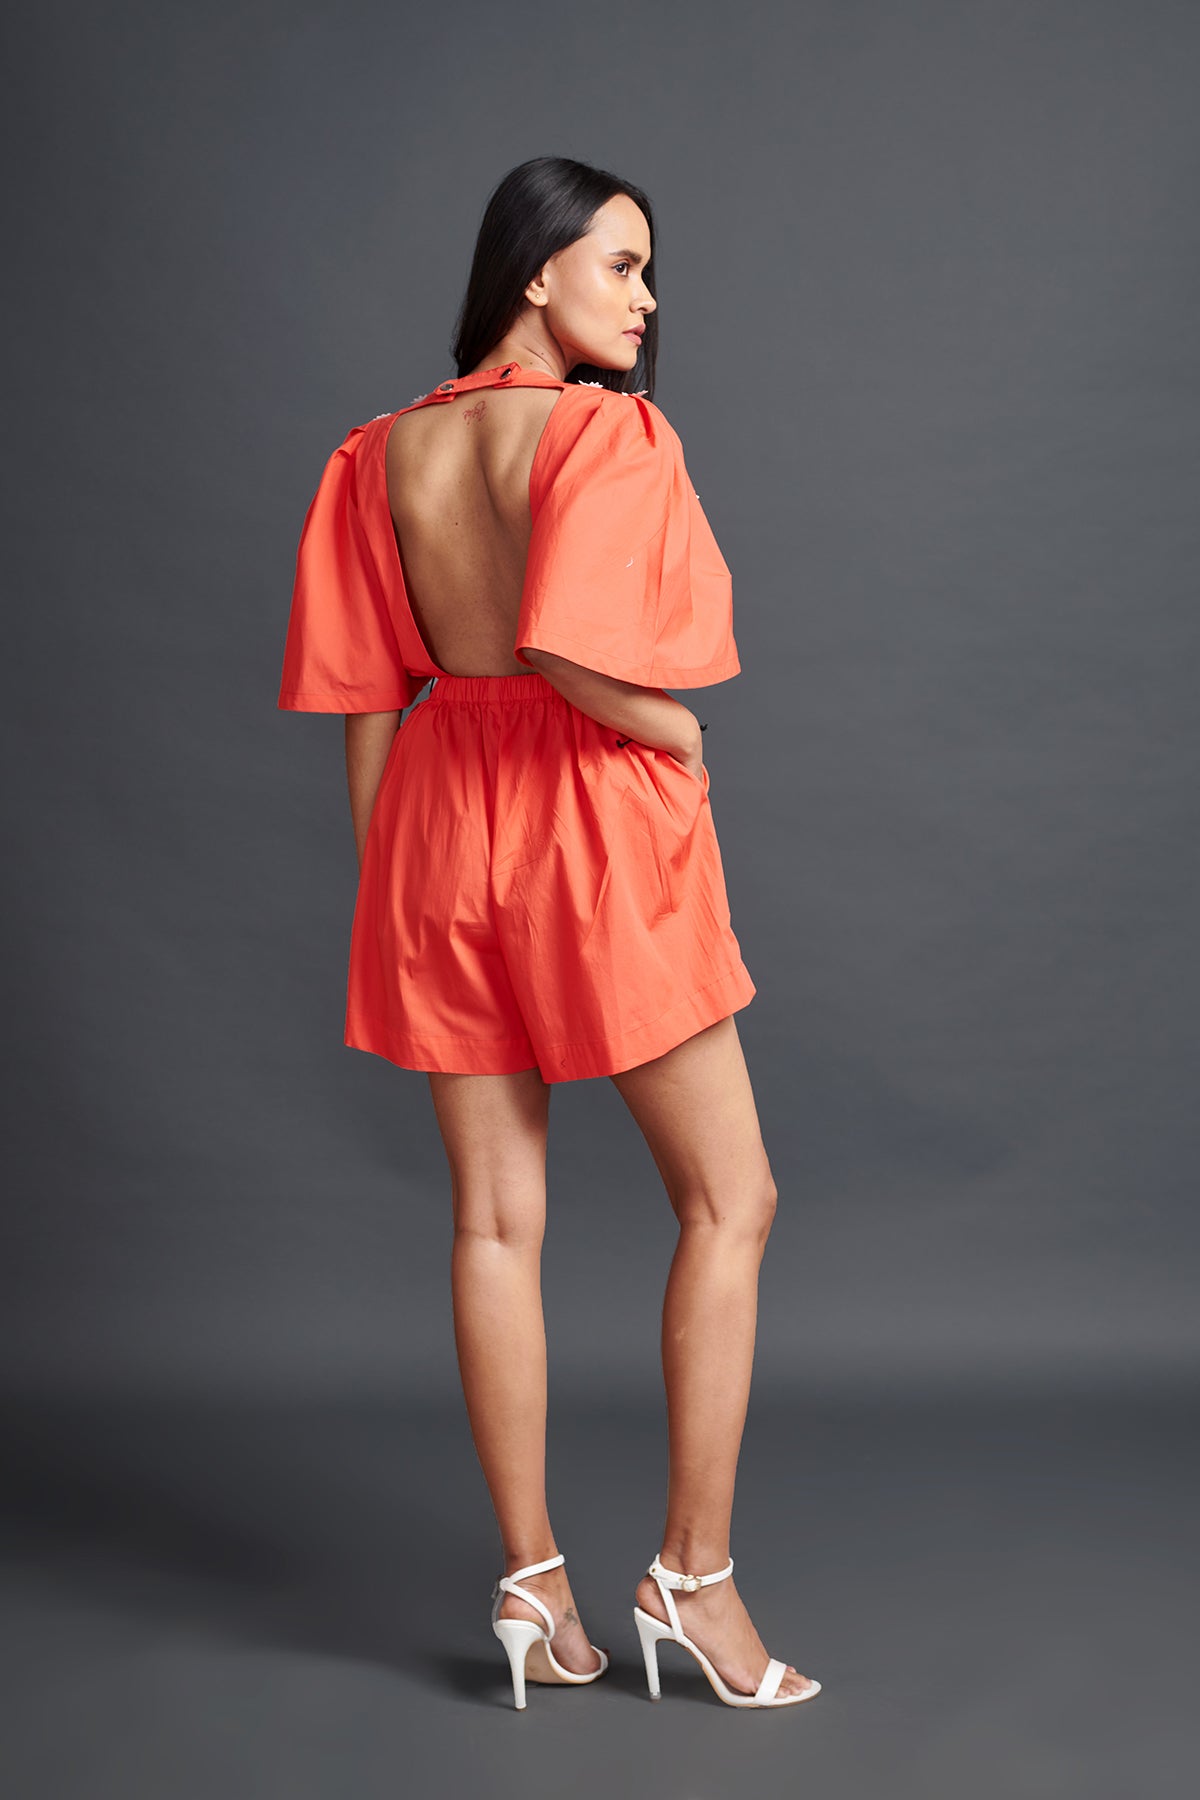 Image of ORANGE PLAYSUIT IN COTTON BASE WITH CUTWORK EMBROIDERY AND BACKLESS SIDE CUT-OUT DETAIL. From savoirfashions.com